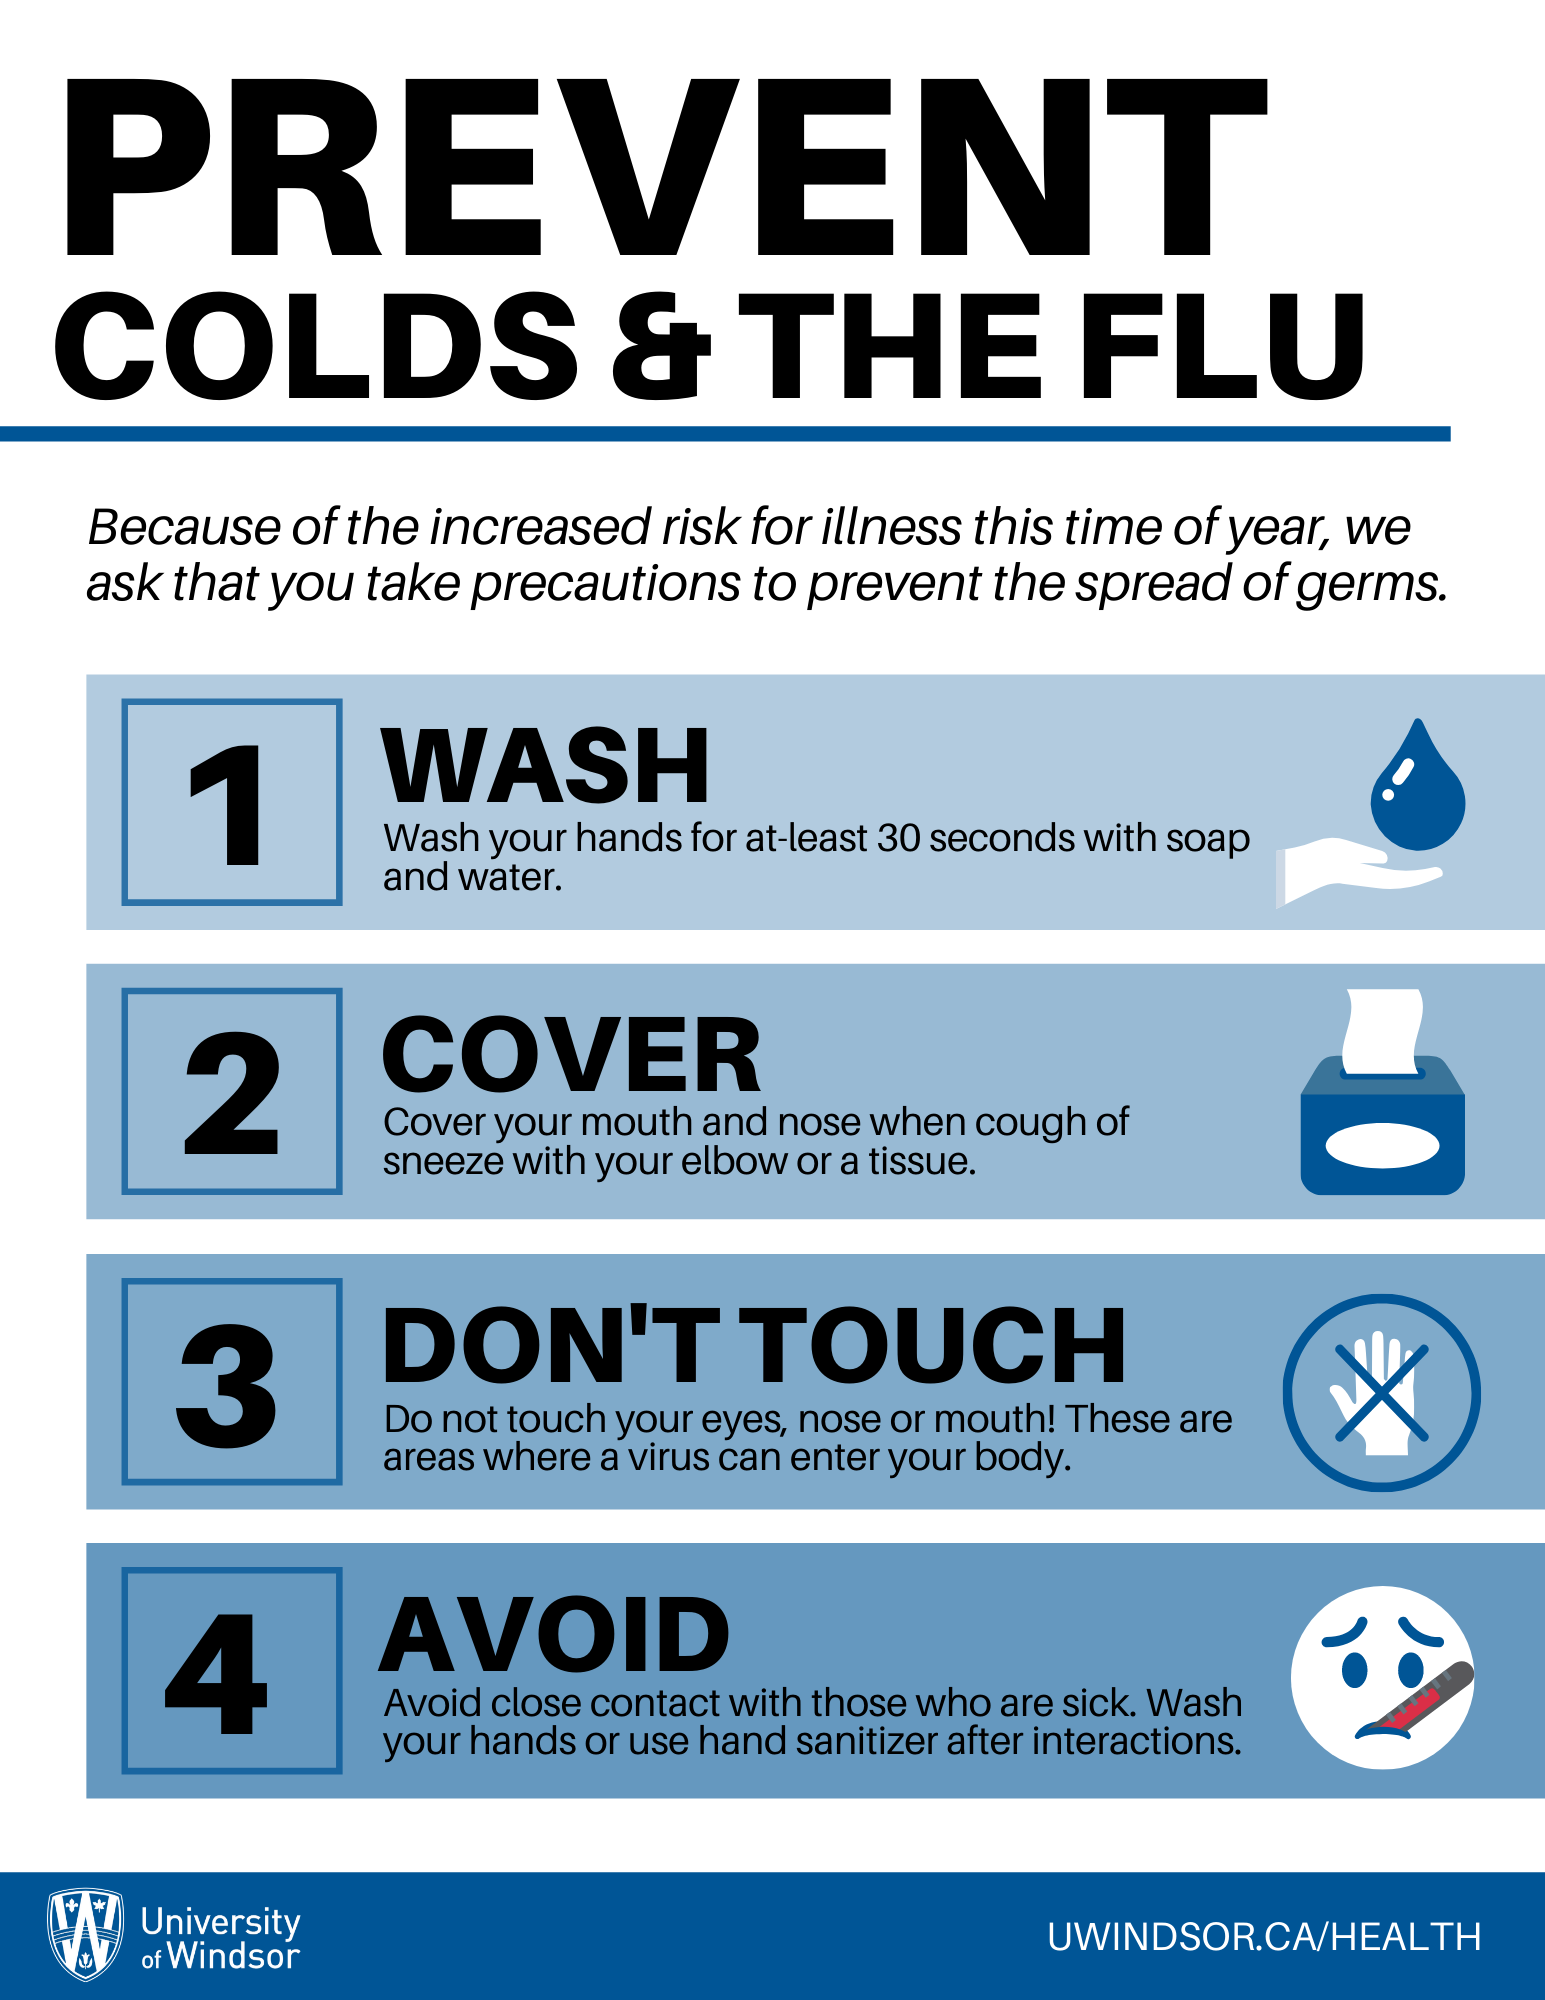 A sign is displayed advising people how to prevent colds and the flu.